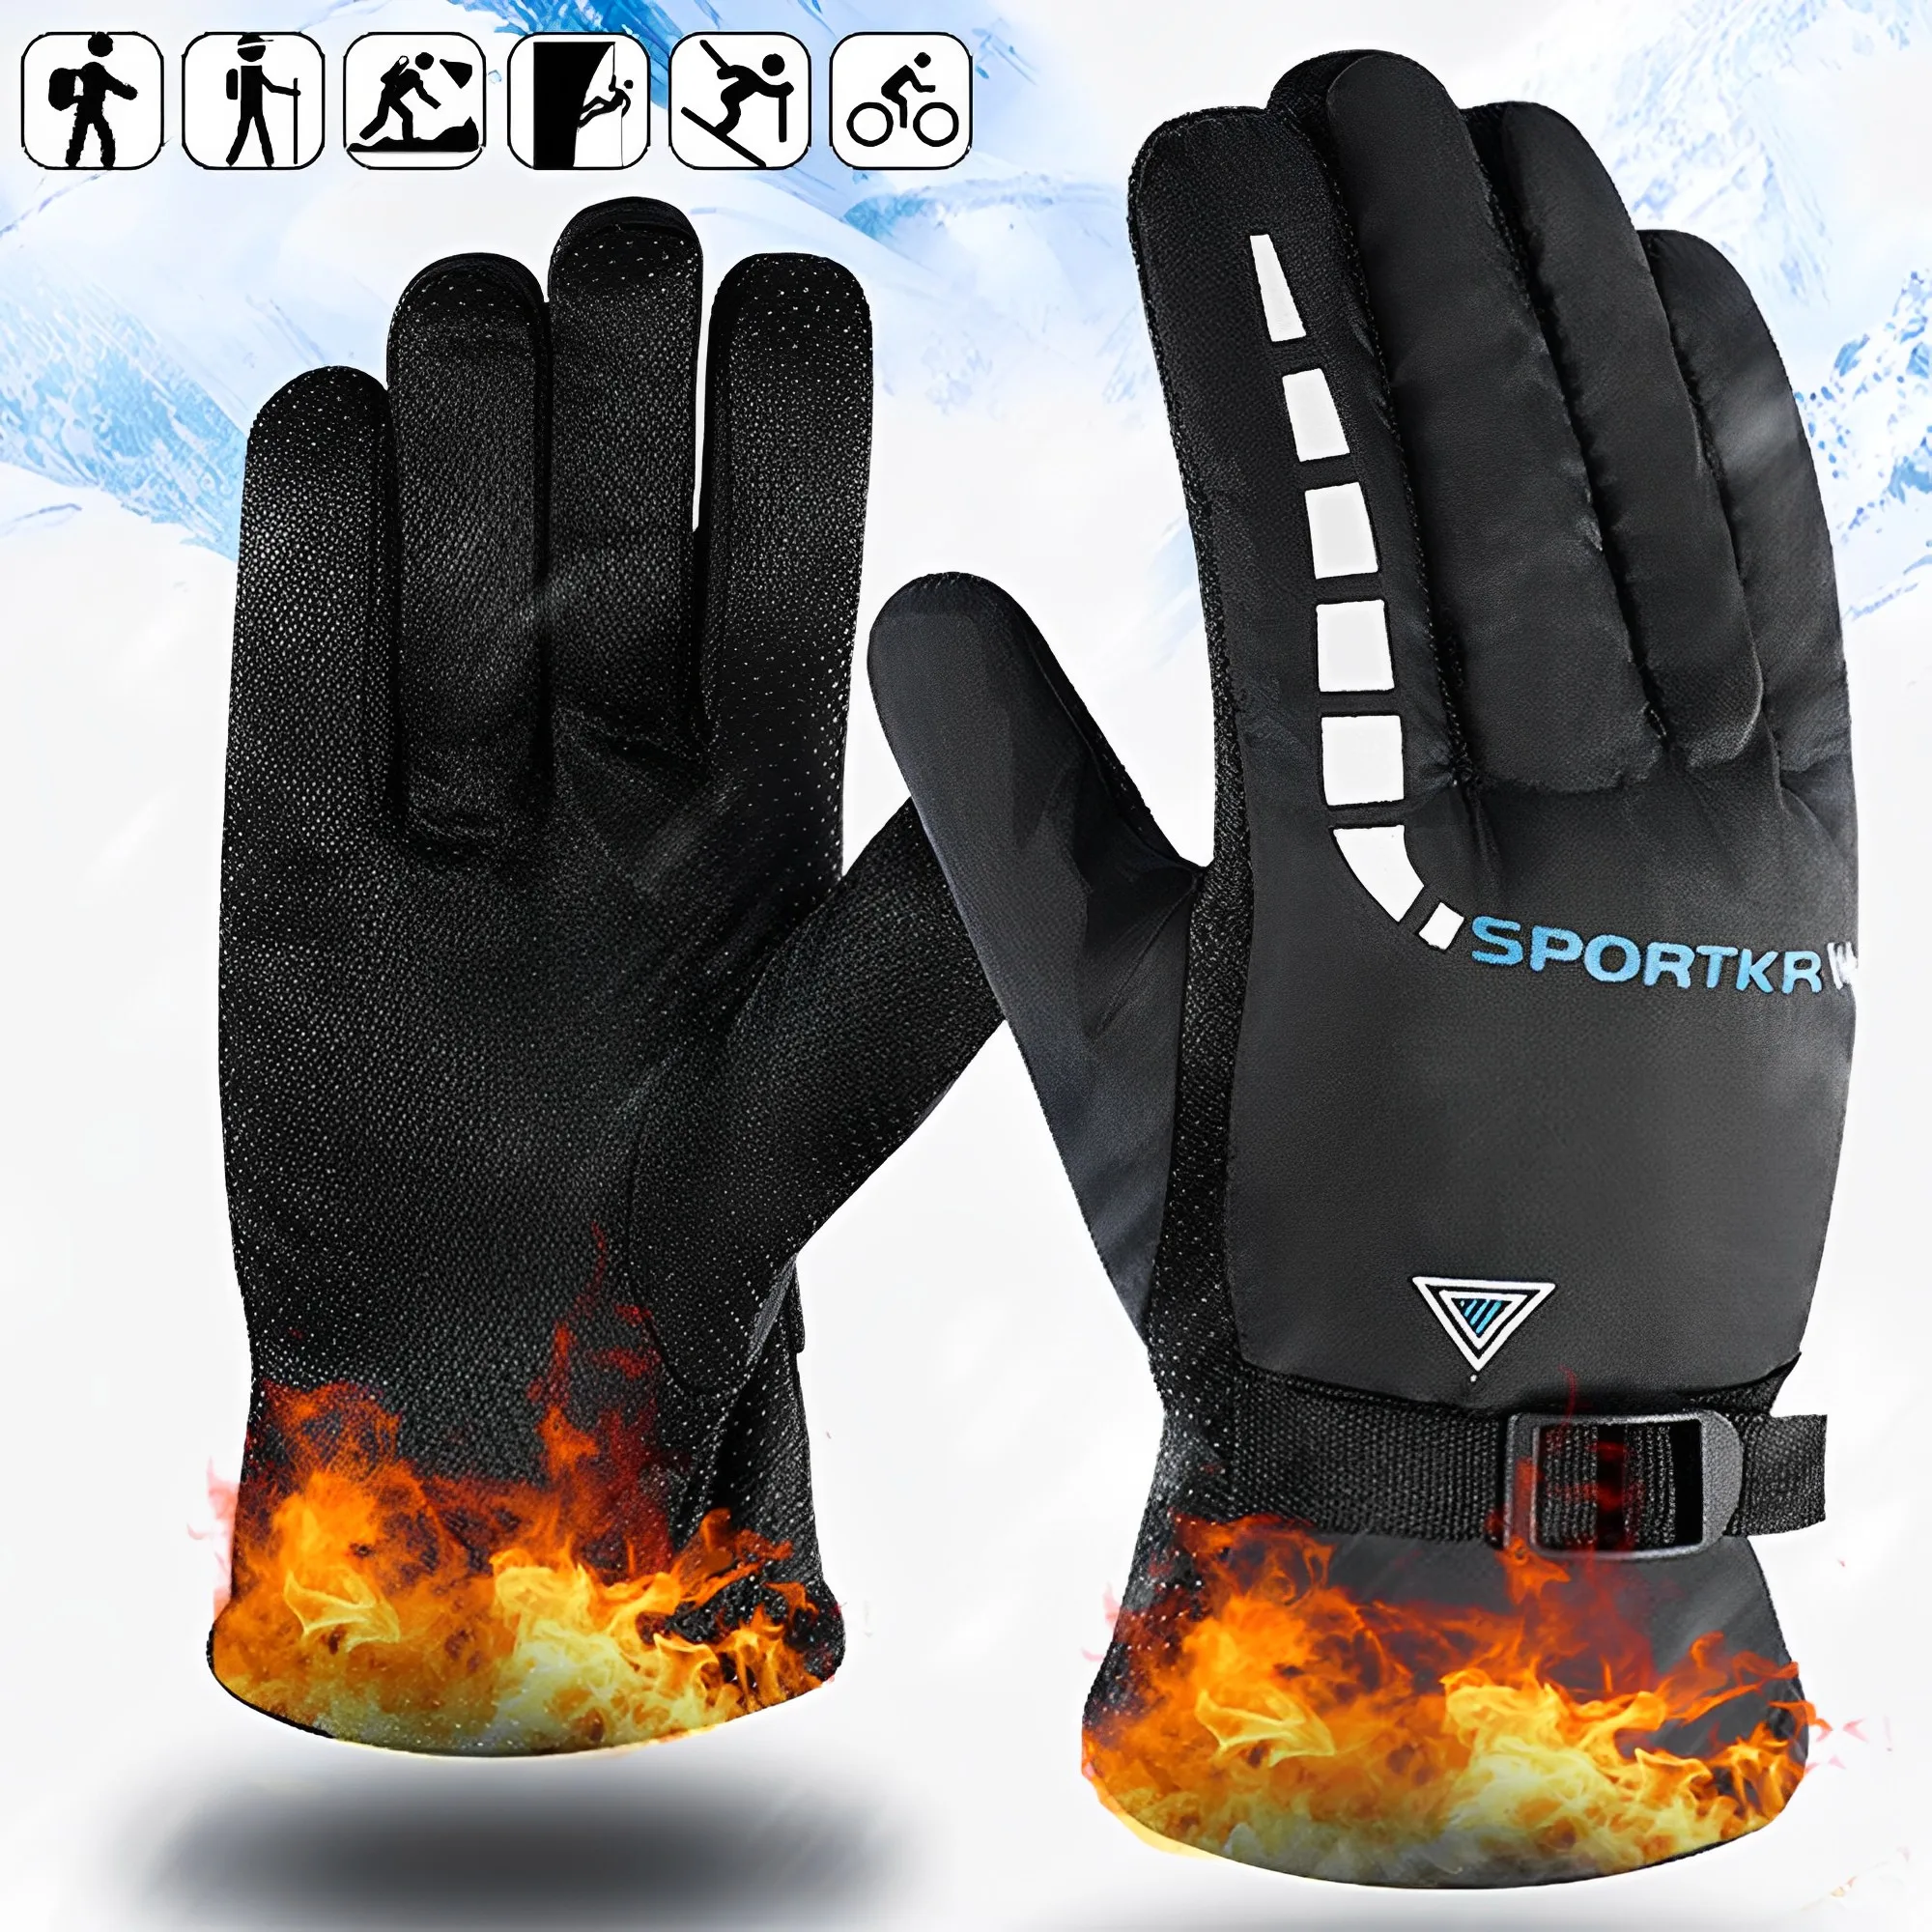 Motorcycle Cycling Gloves Winter Outdoor Waterproof Skiing Riding Hiking Warm - £13.82 GBP